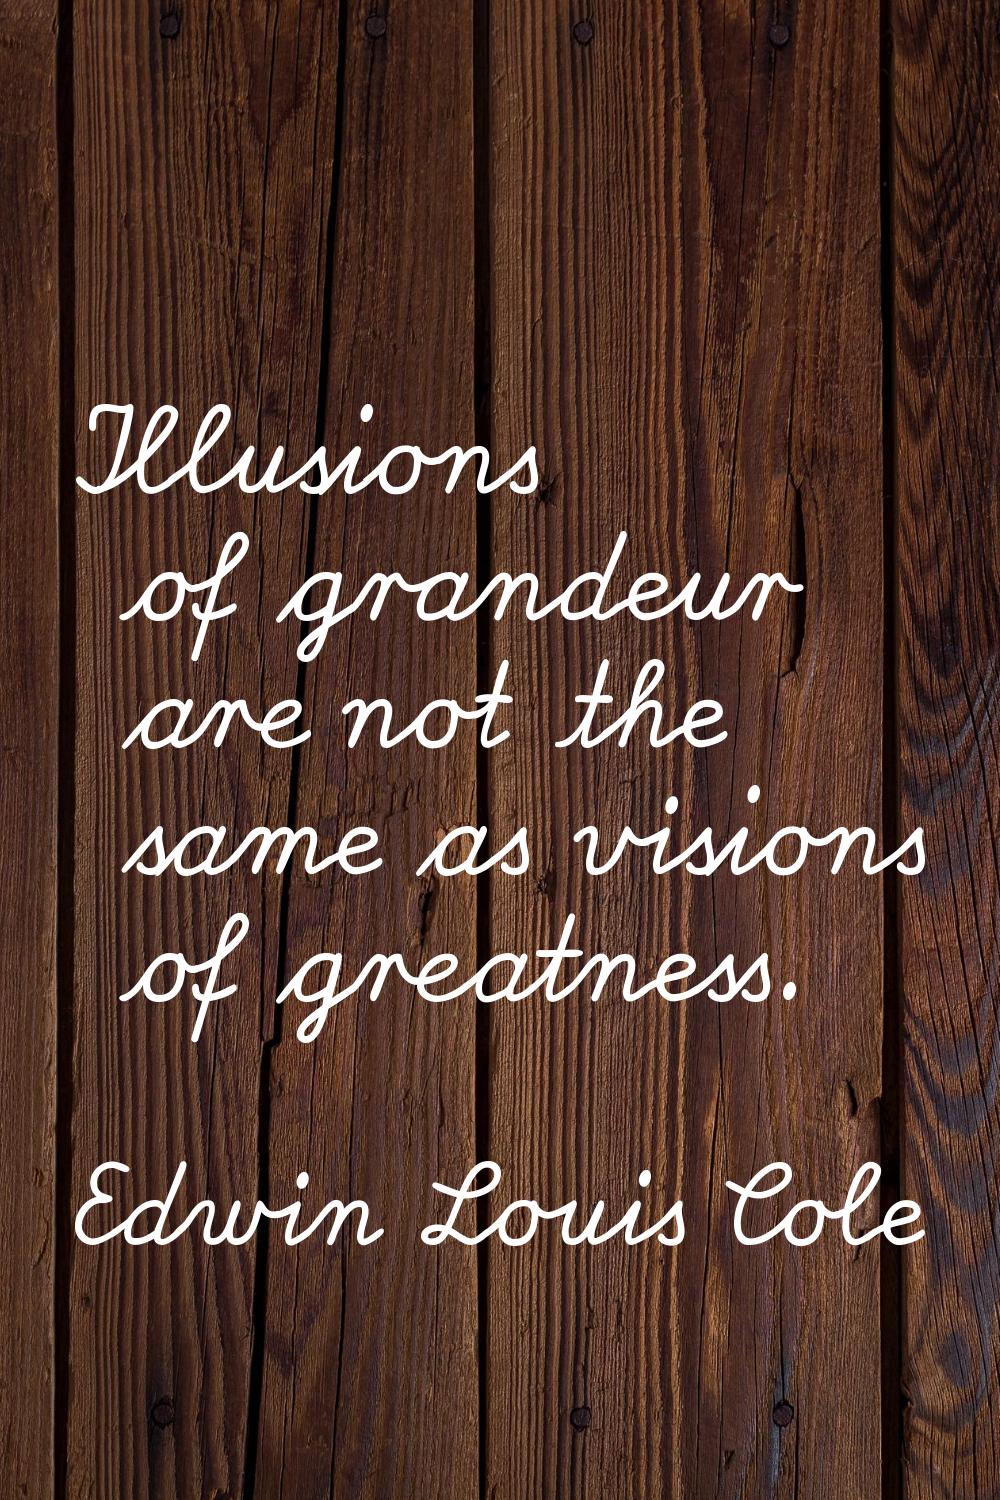 Illusions of grandeur are not the same as visions of greatness.